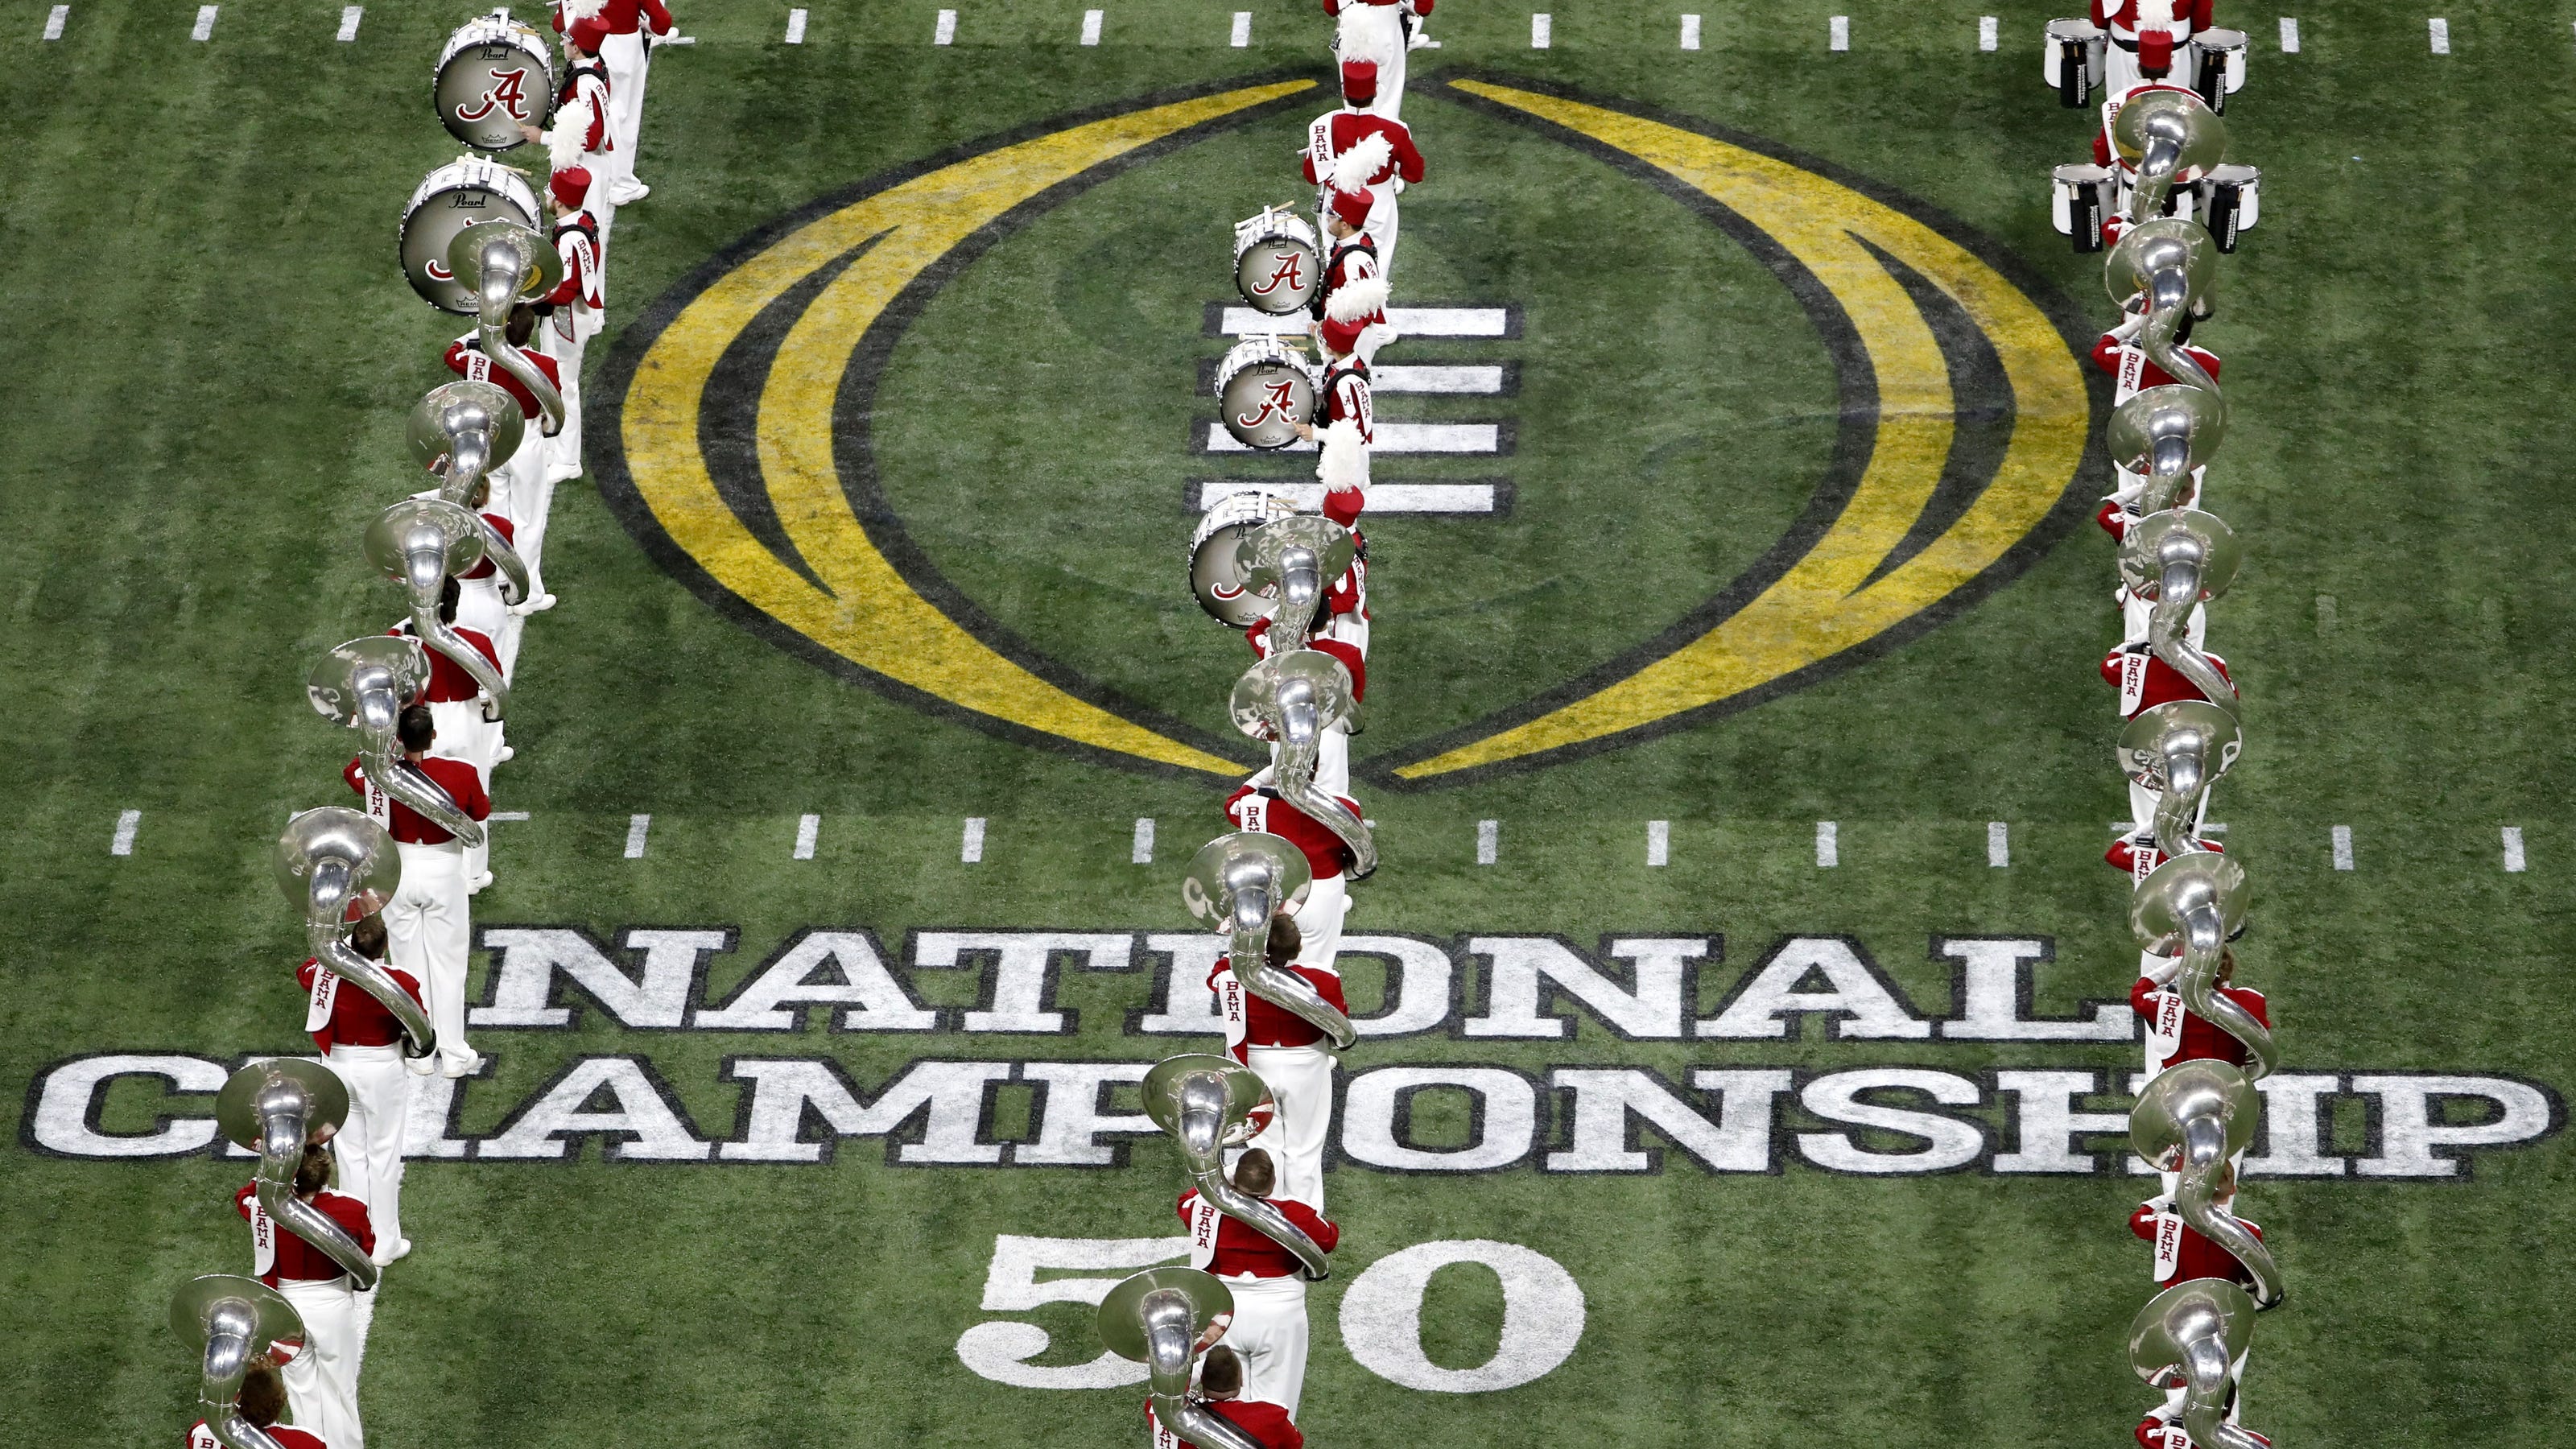 College Football Playoff expanding to 12 teams for 2024 season